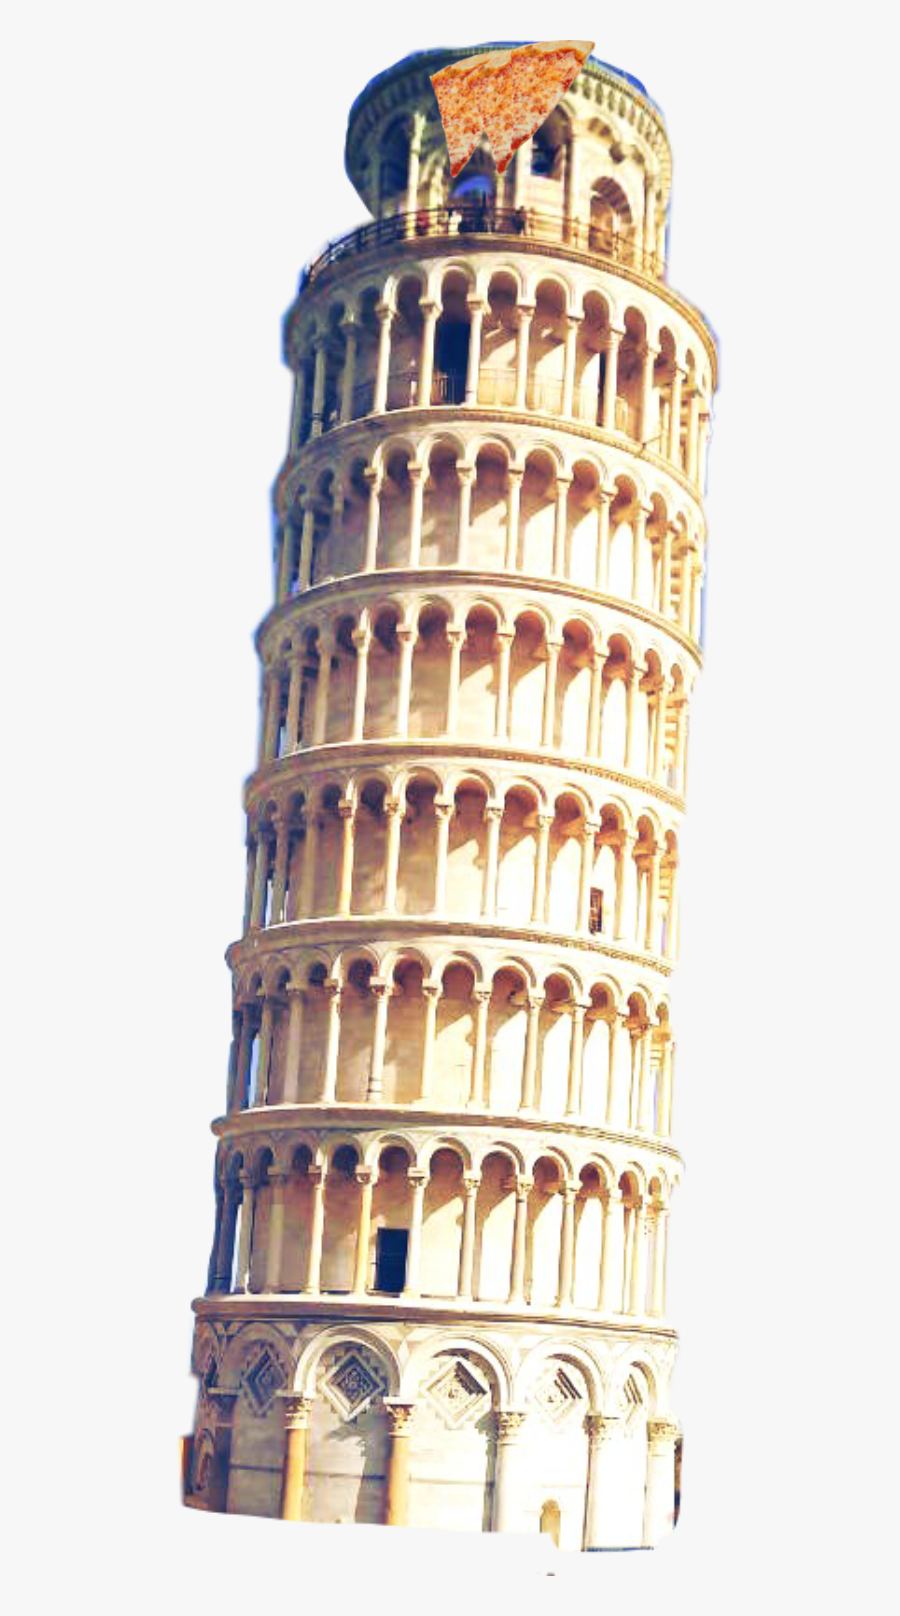 Nothing Better Than The Leaning Tower Of Pizzal - Piazza Dei Miracoli, Transparent Clipart